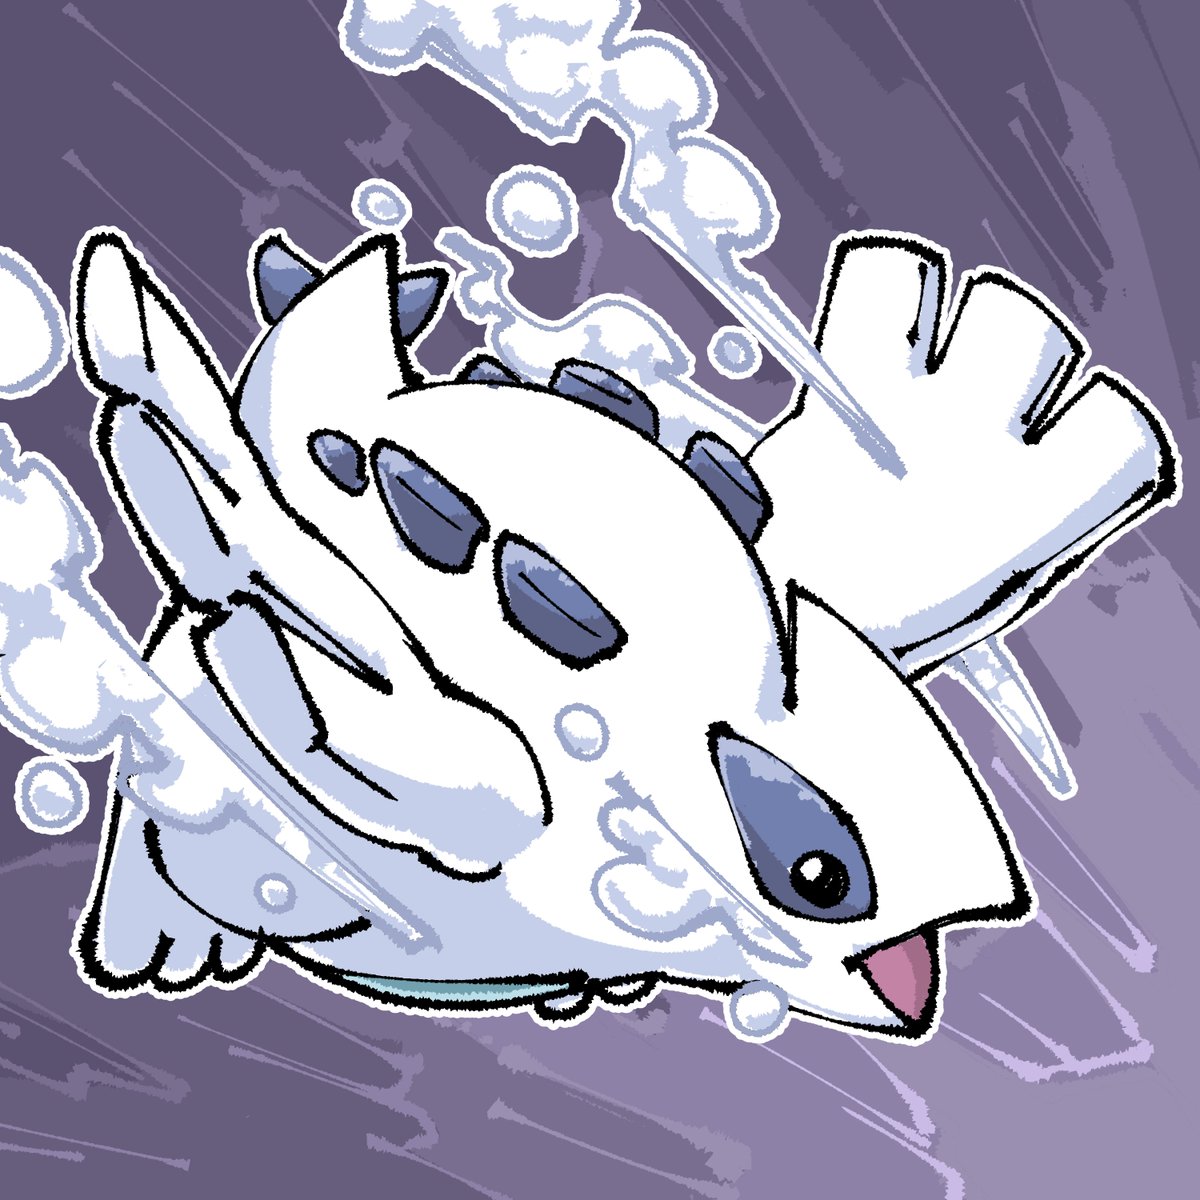 Fat lugia inspired by someone asking for it